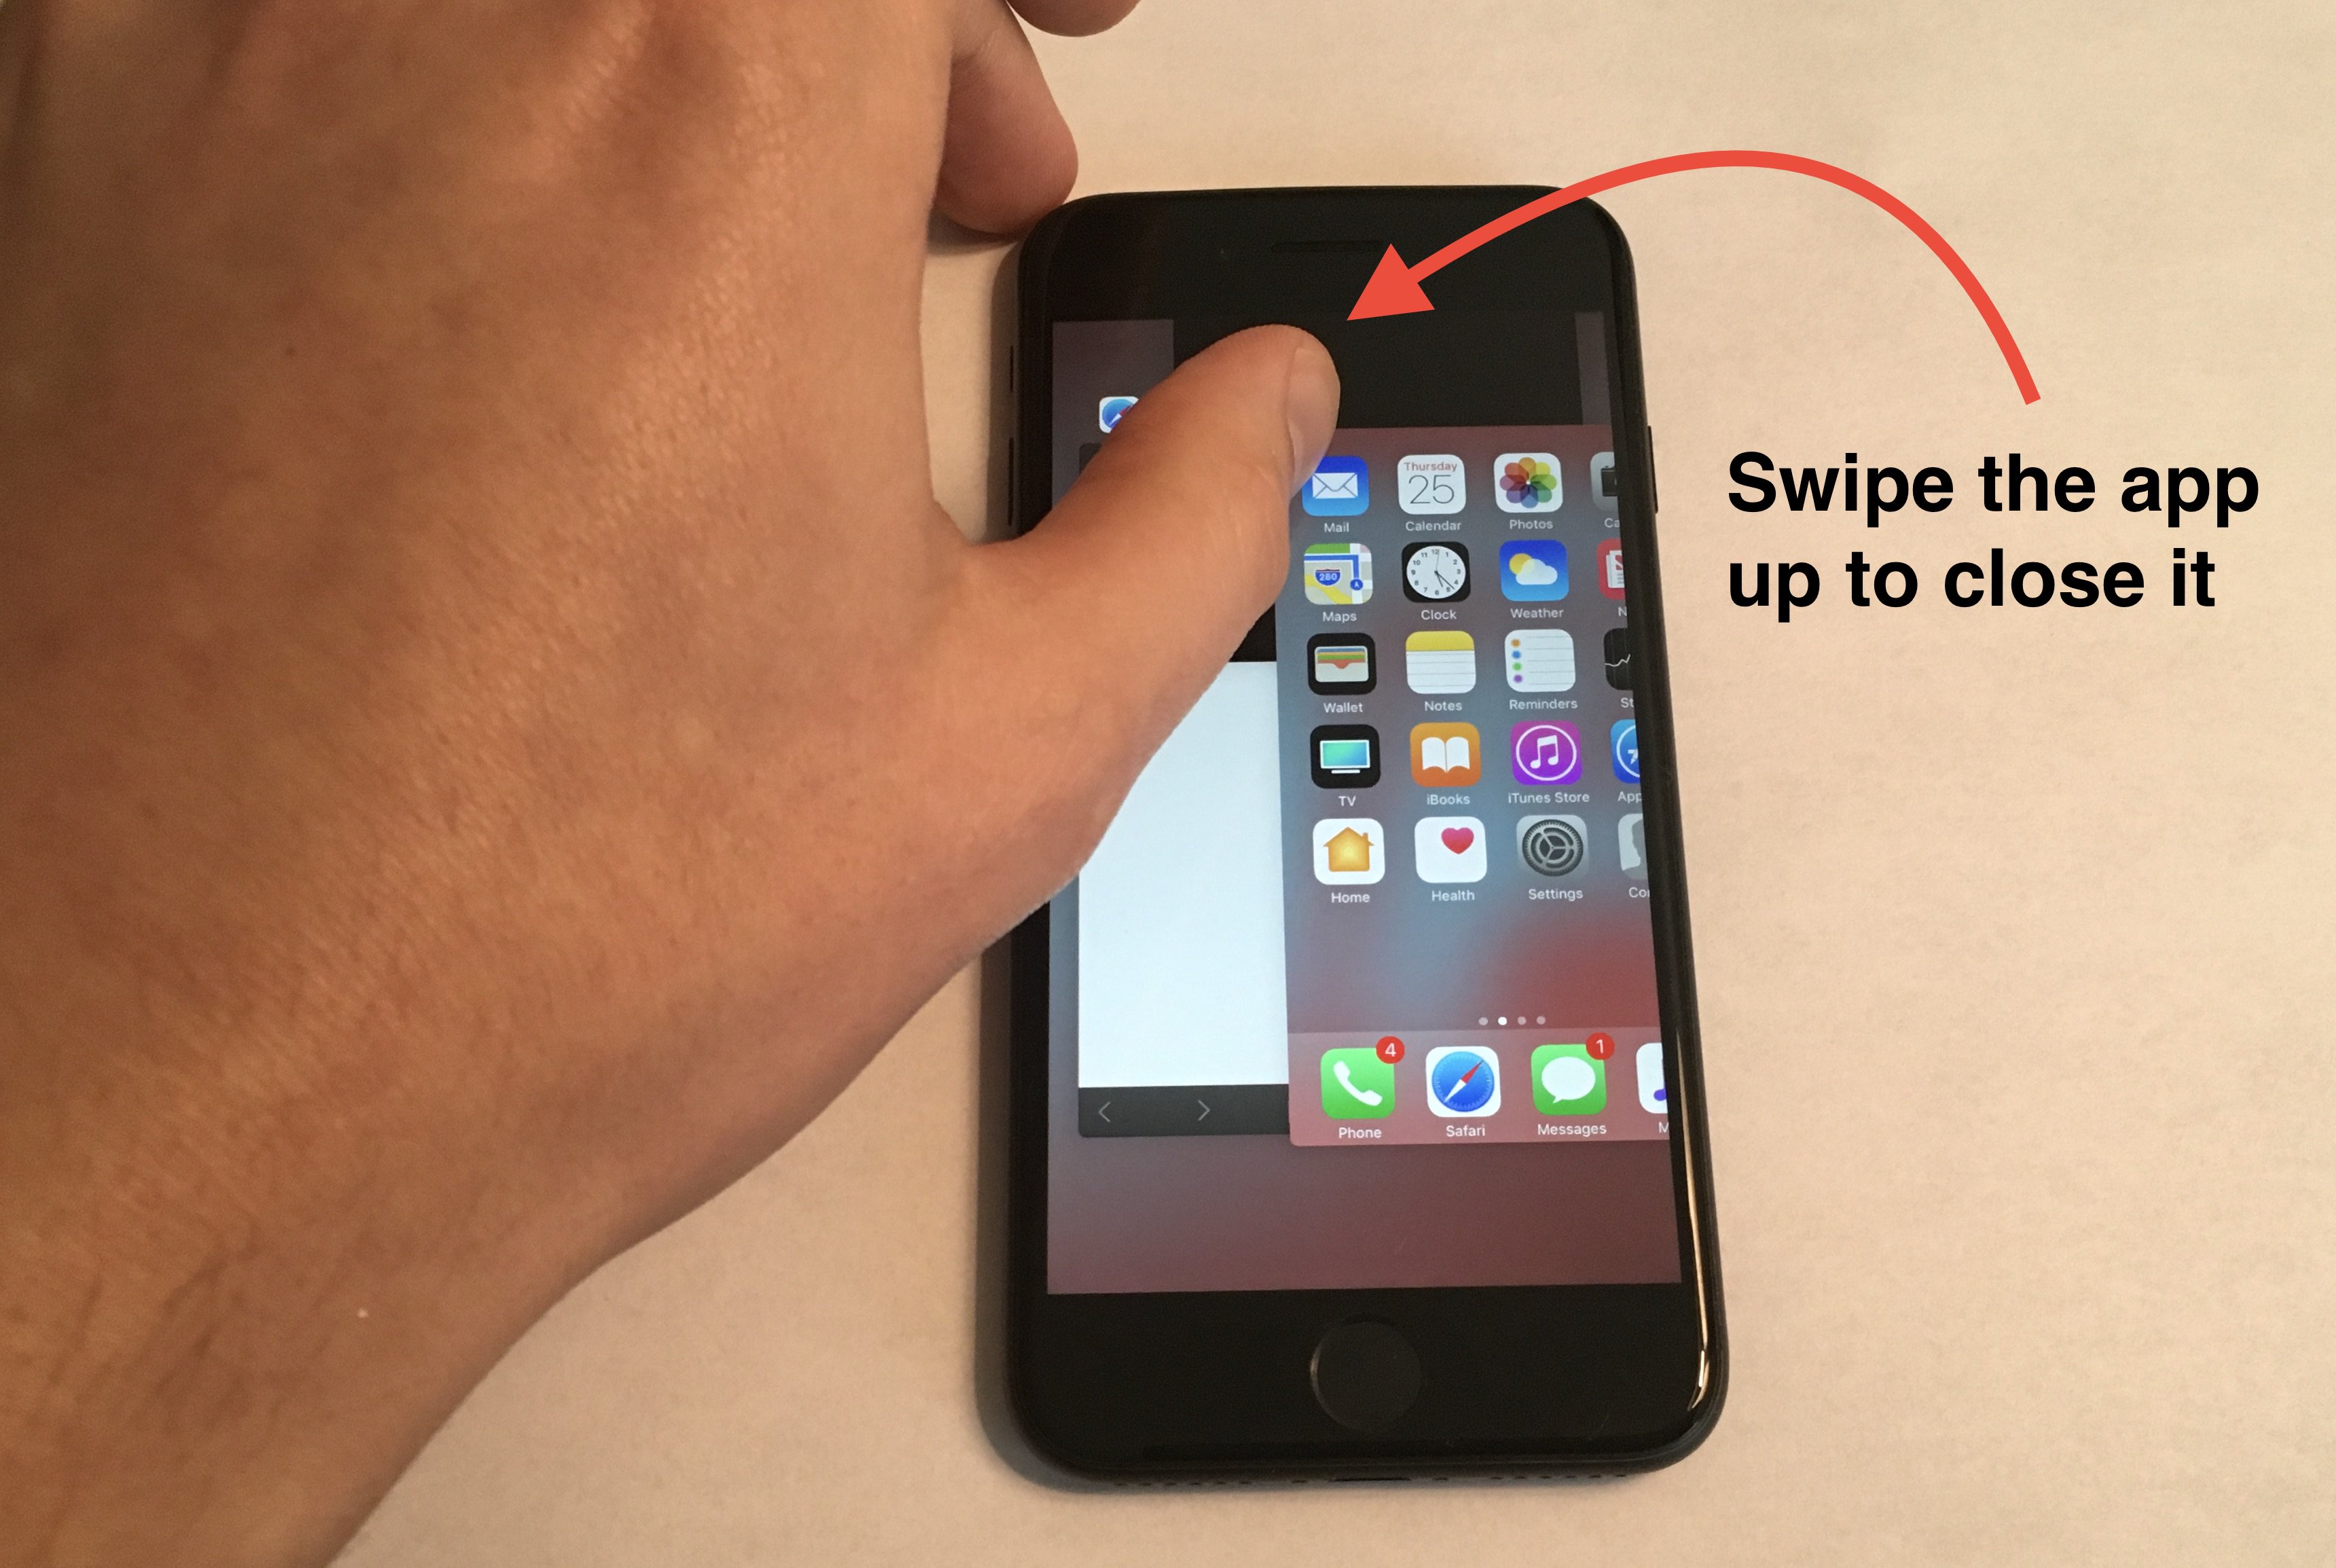 swipe up on app to close it from app switcher